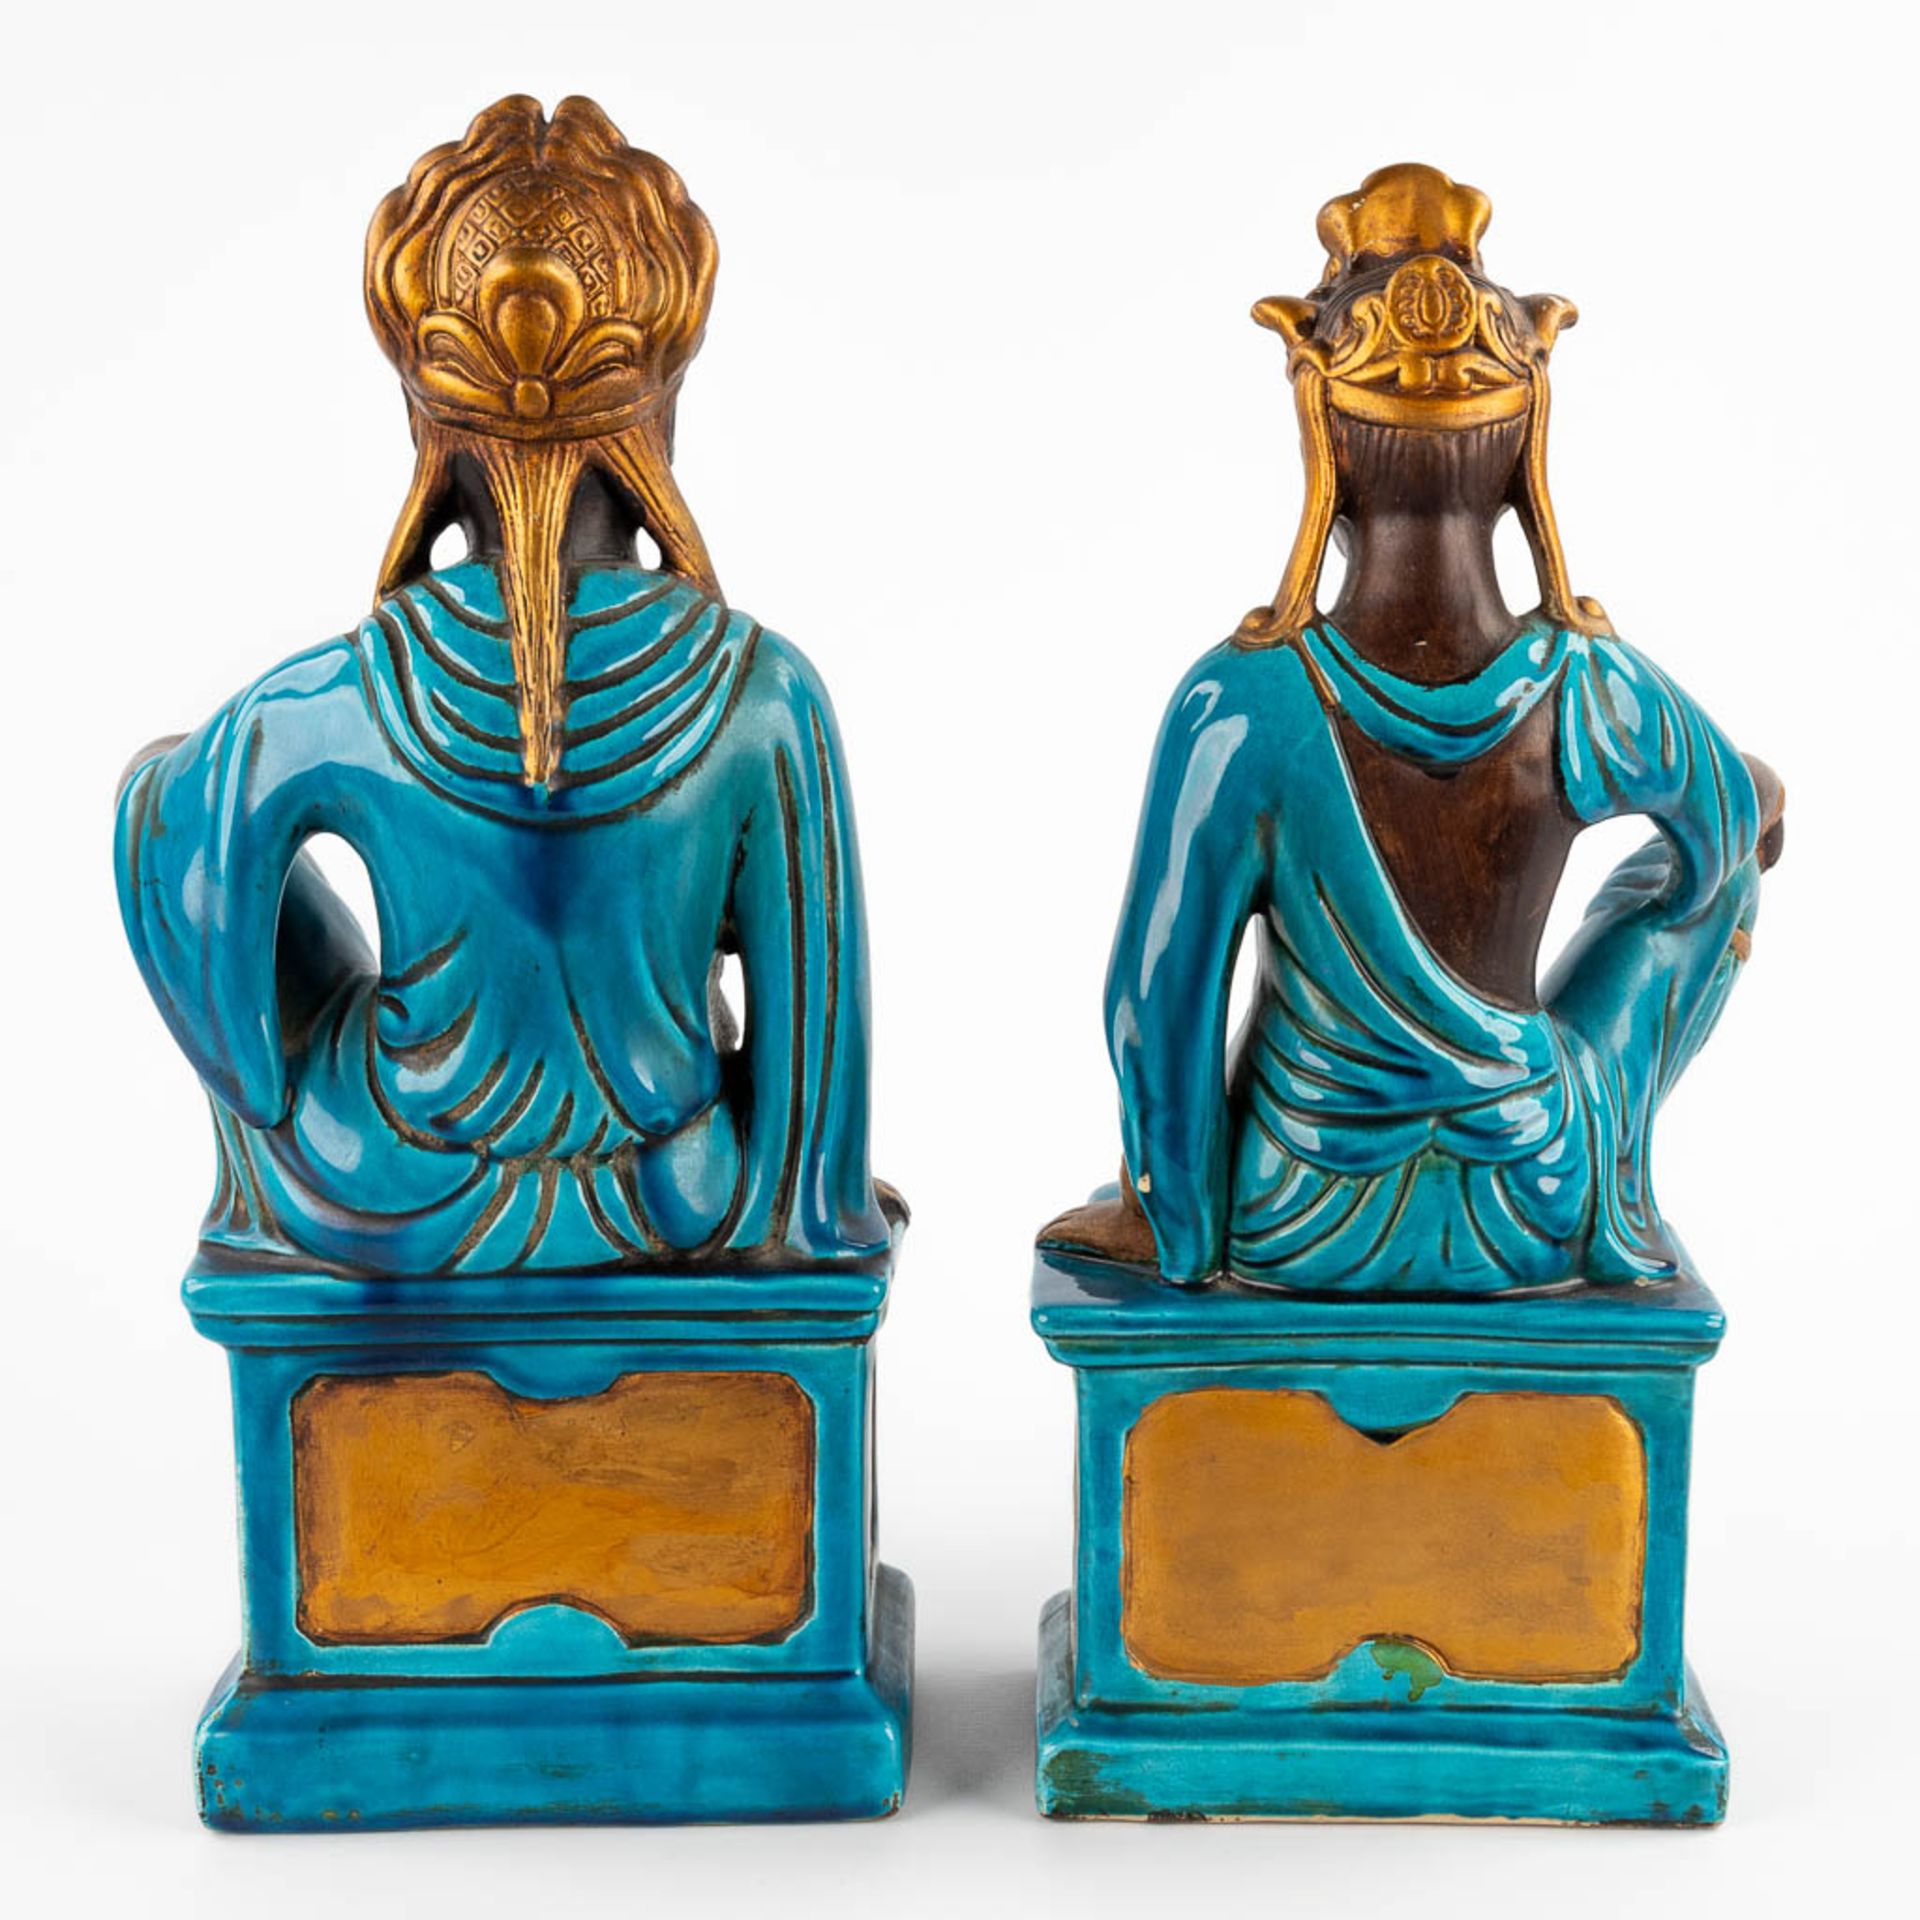 A pair of Temple guards and a pair of geese, glazed stoneware. 20th C. (D:15 x W:21 x H:44 cm) - Image 5 of 16